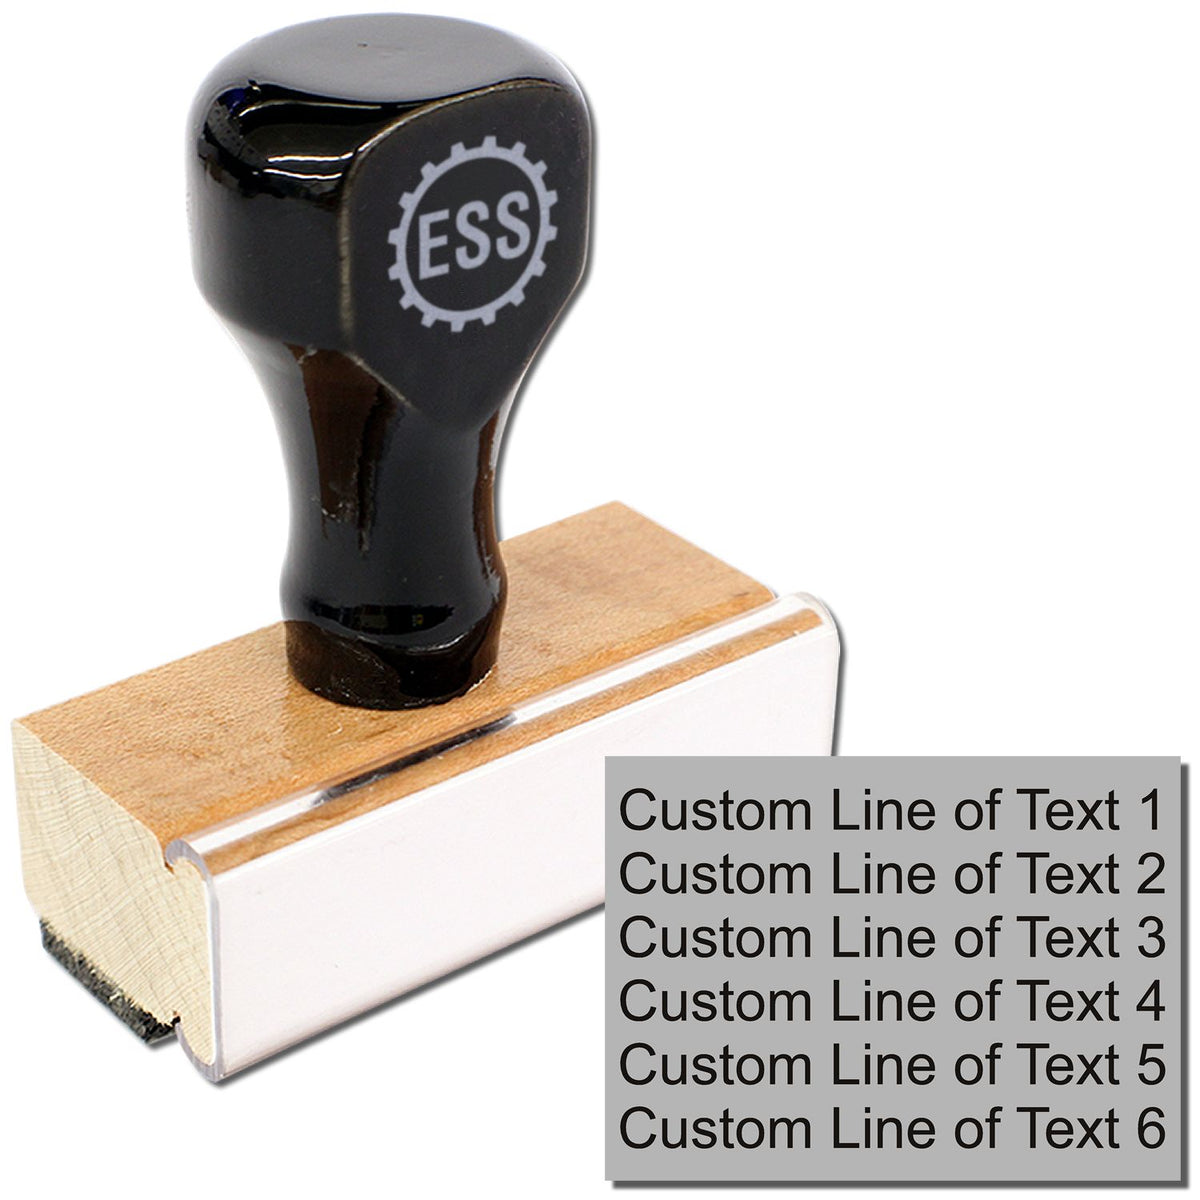 6 Line Custom Rubber Stamp with Wood Handle